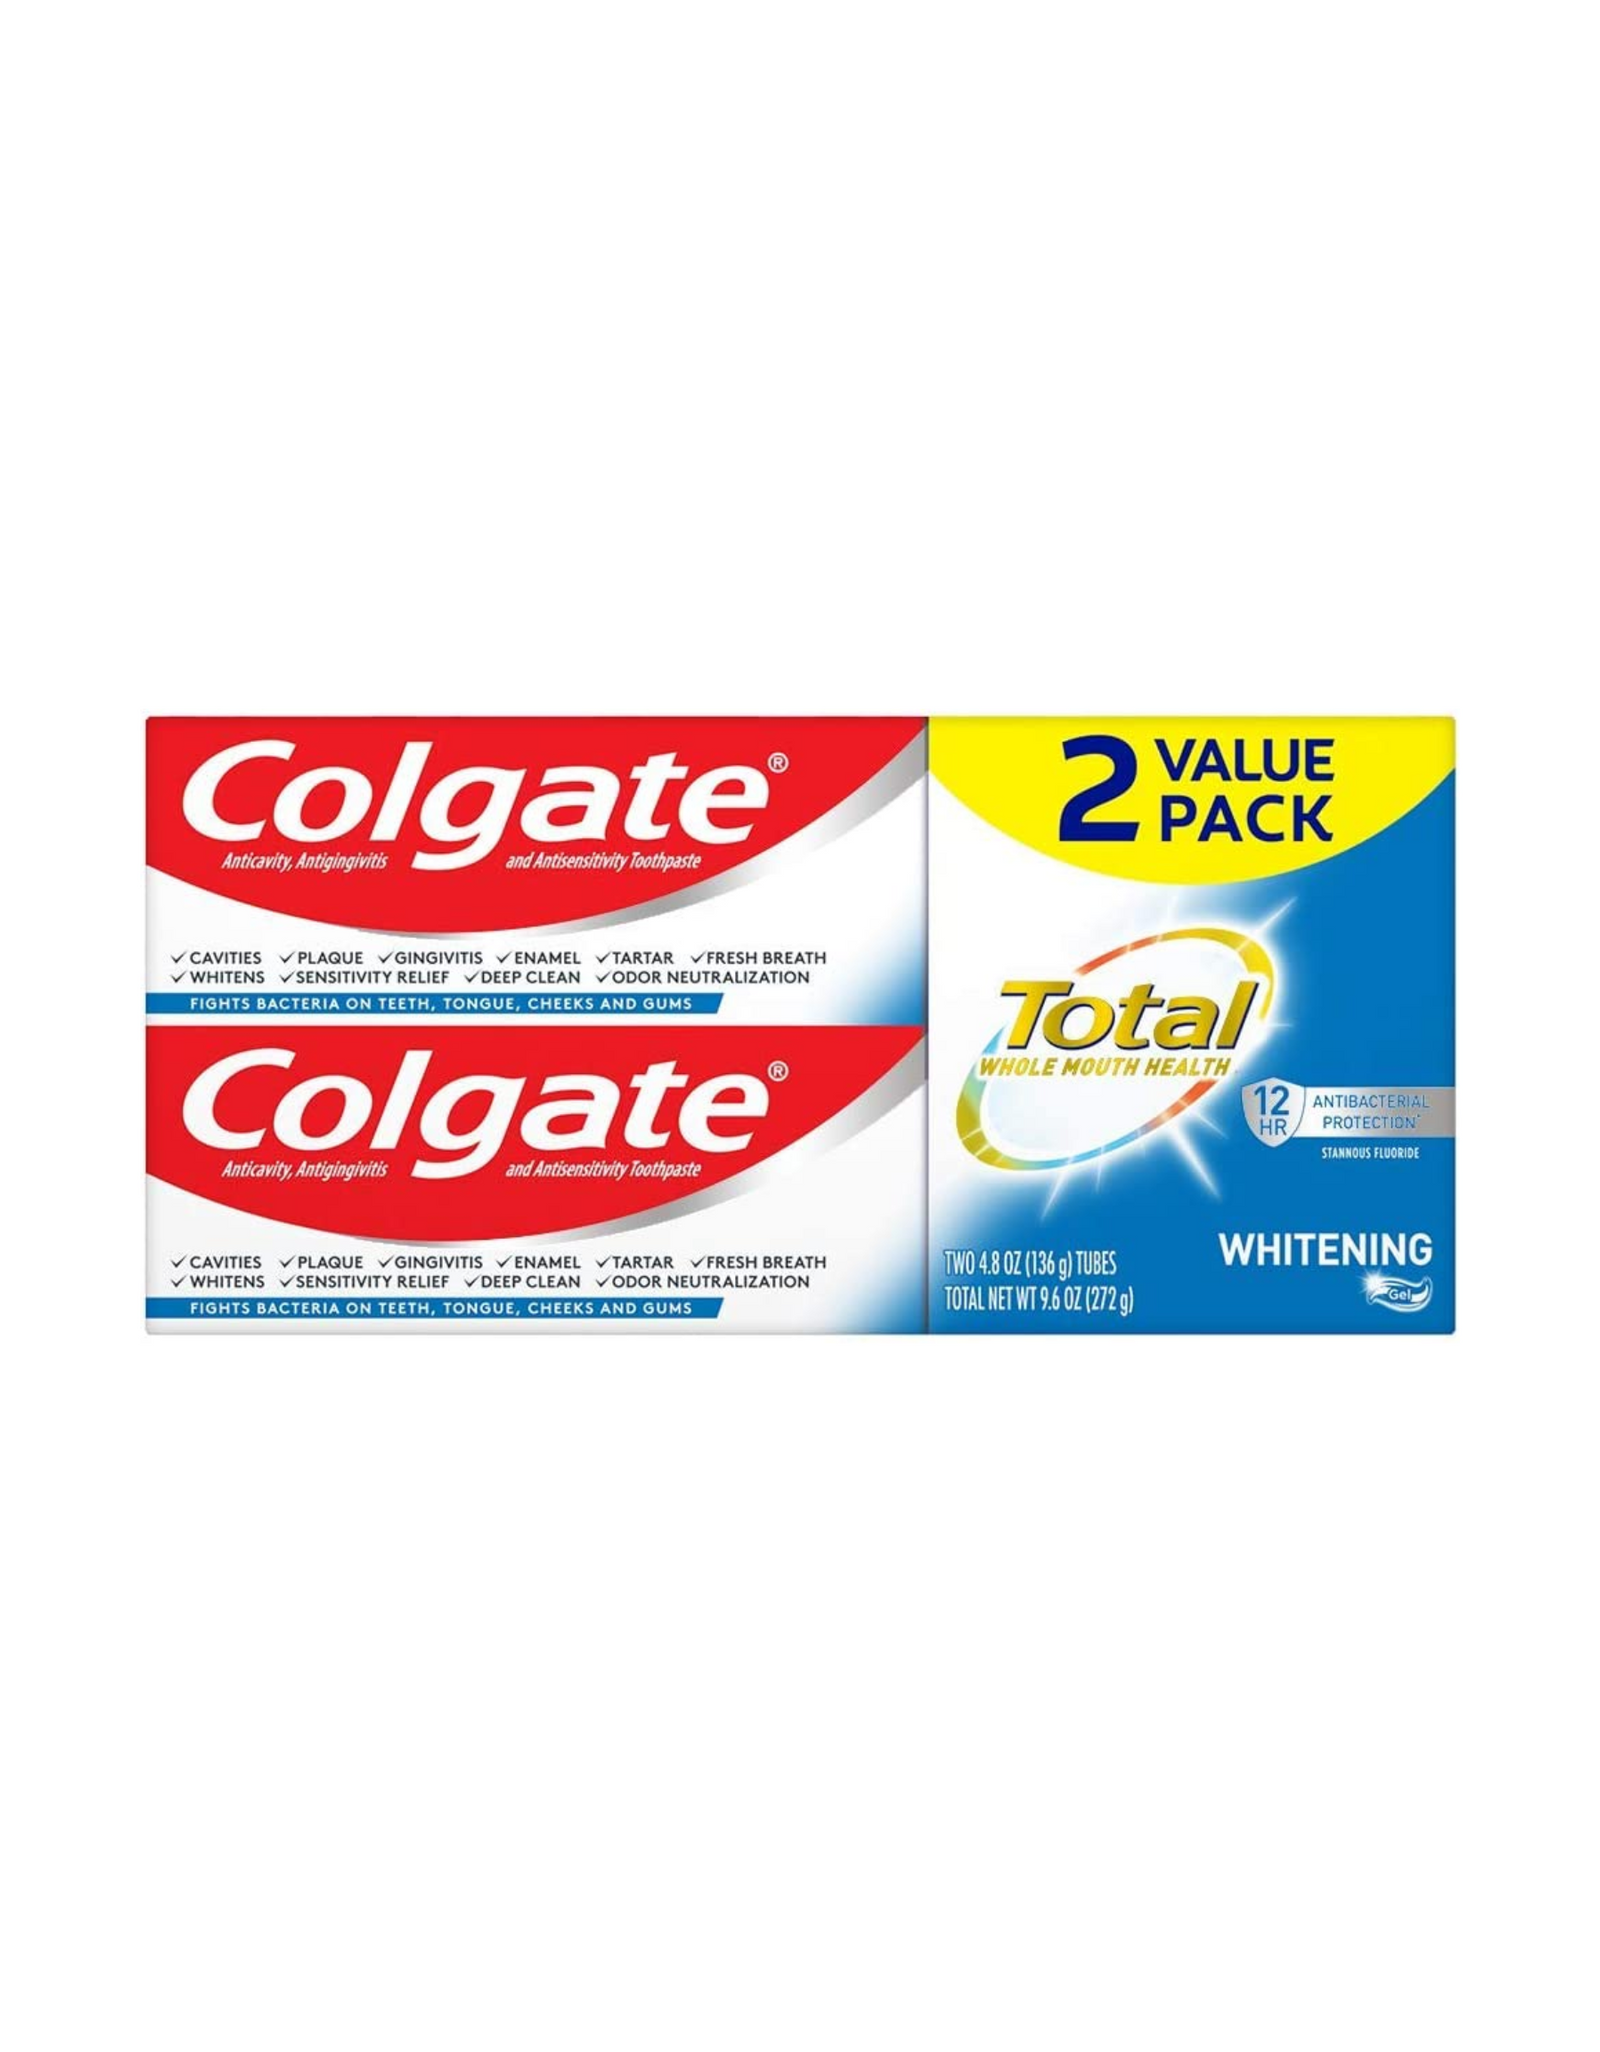 Colgate Total Whitening Toothpaste Gel, Stannous Fluoride and Zinc, Original, Whitening Mint, 4.8 oz each (Pack of 2)